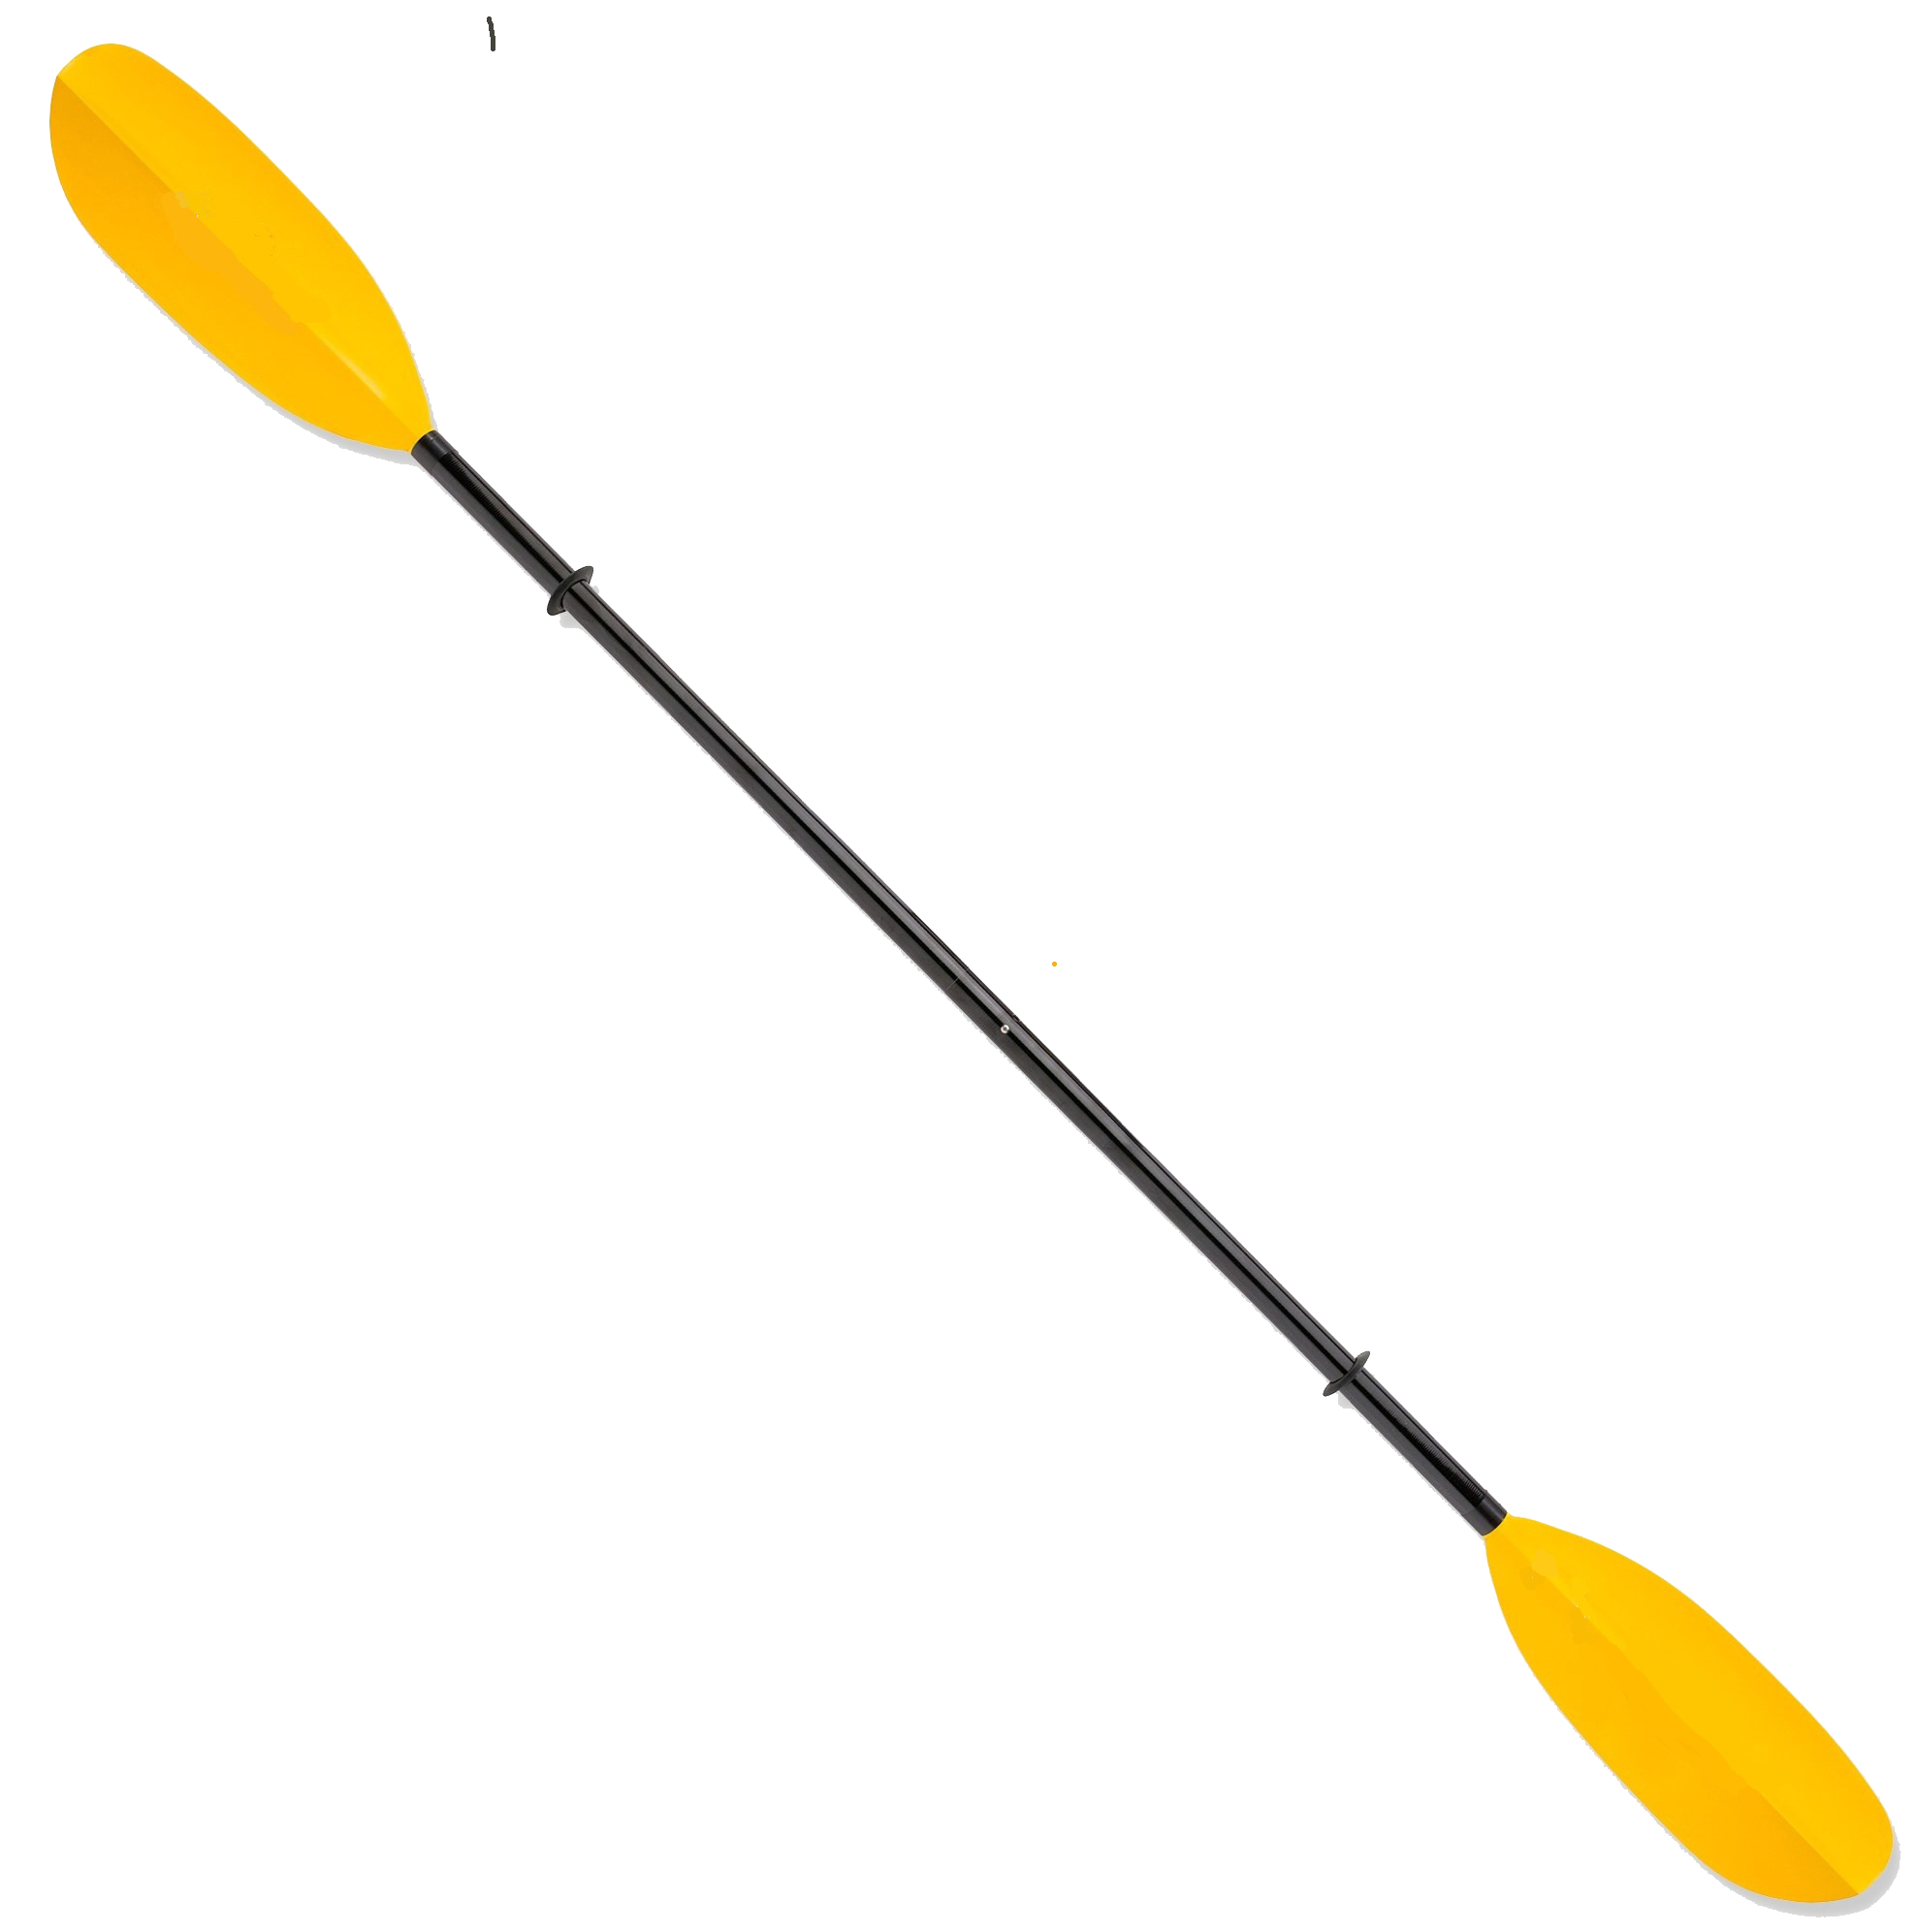 Paddle Png Clipart - Paddle, Transparent background PNG HD thumbnail